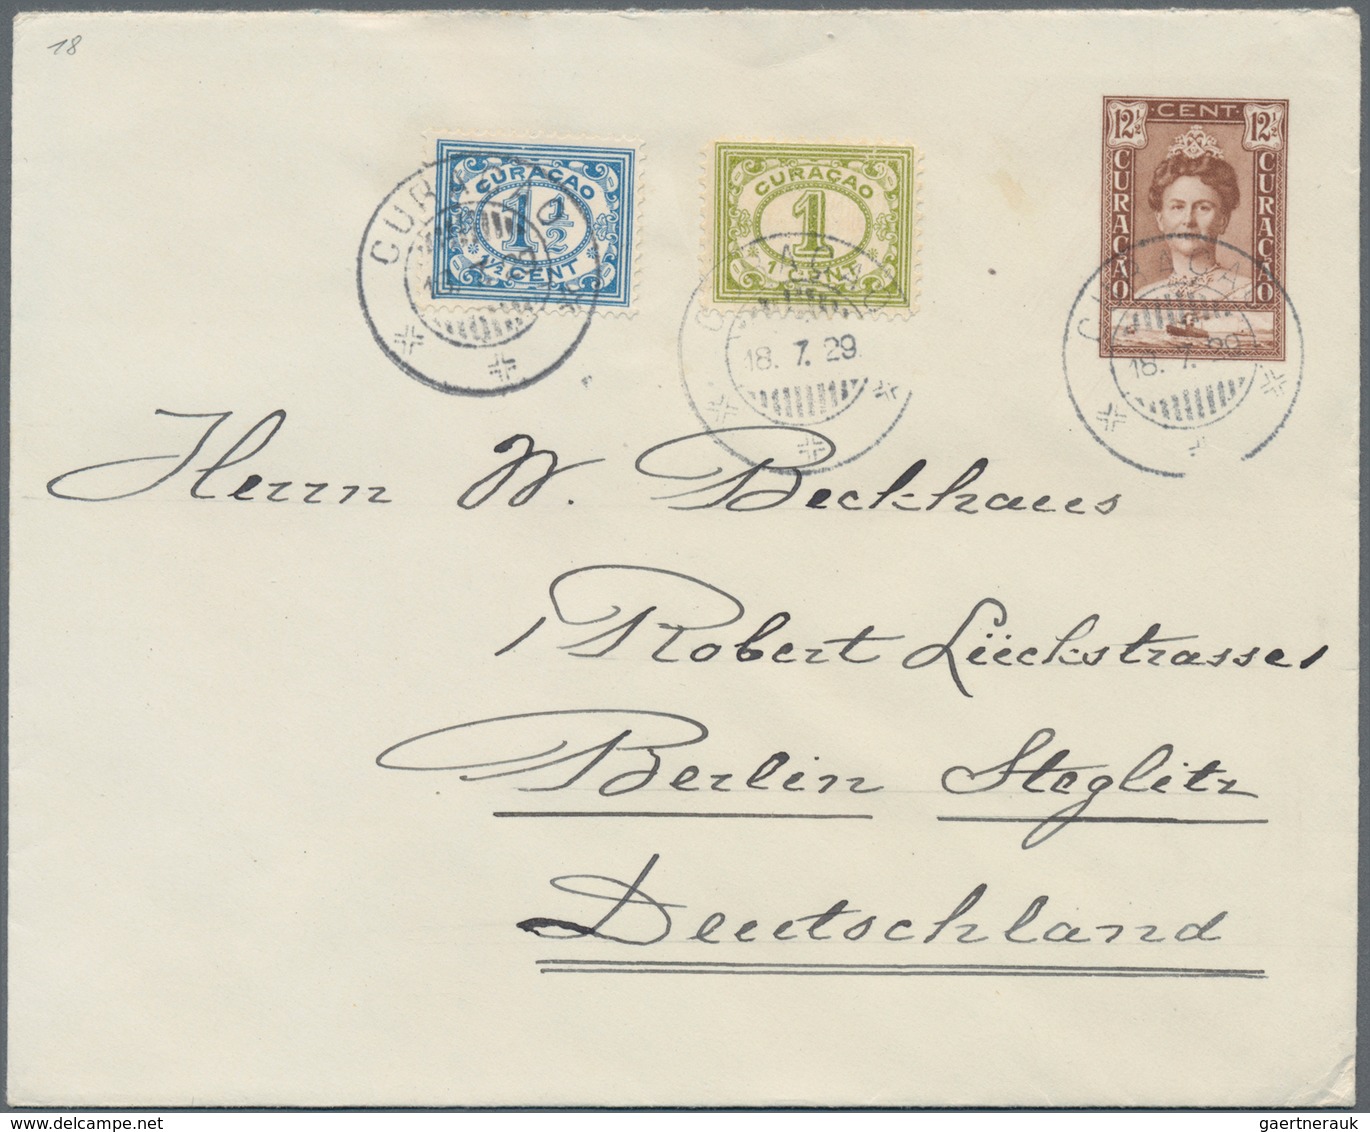 Curacao: 1929, Two Stationery Envelopes: 12½ C Brown Uprated 1 C And 1½ C And 15 C Deep-blue Both Se - Curacao, Netherlands Antilles, Aruba